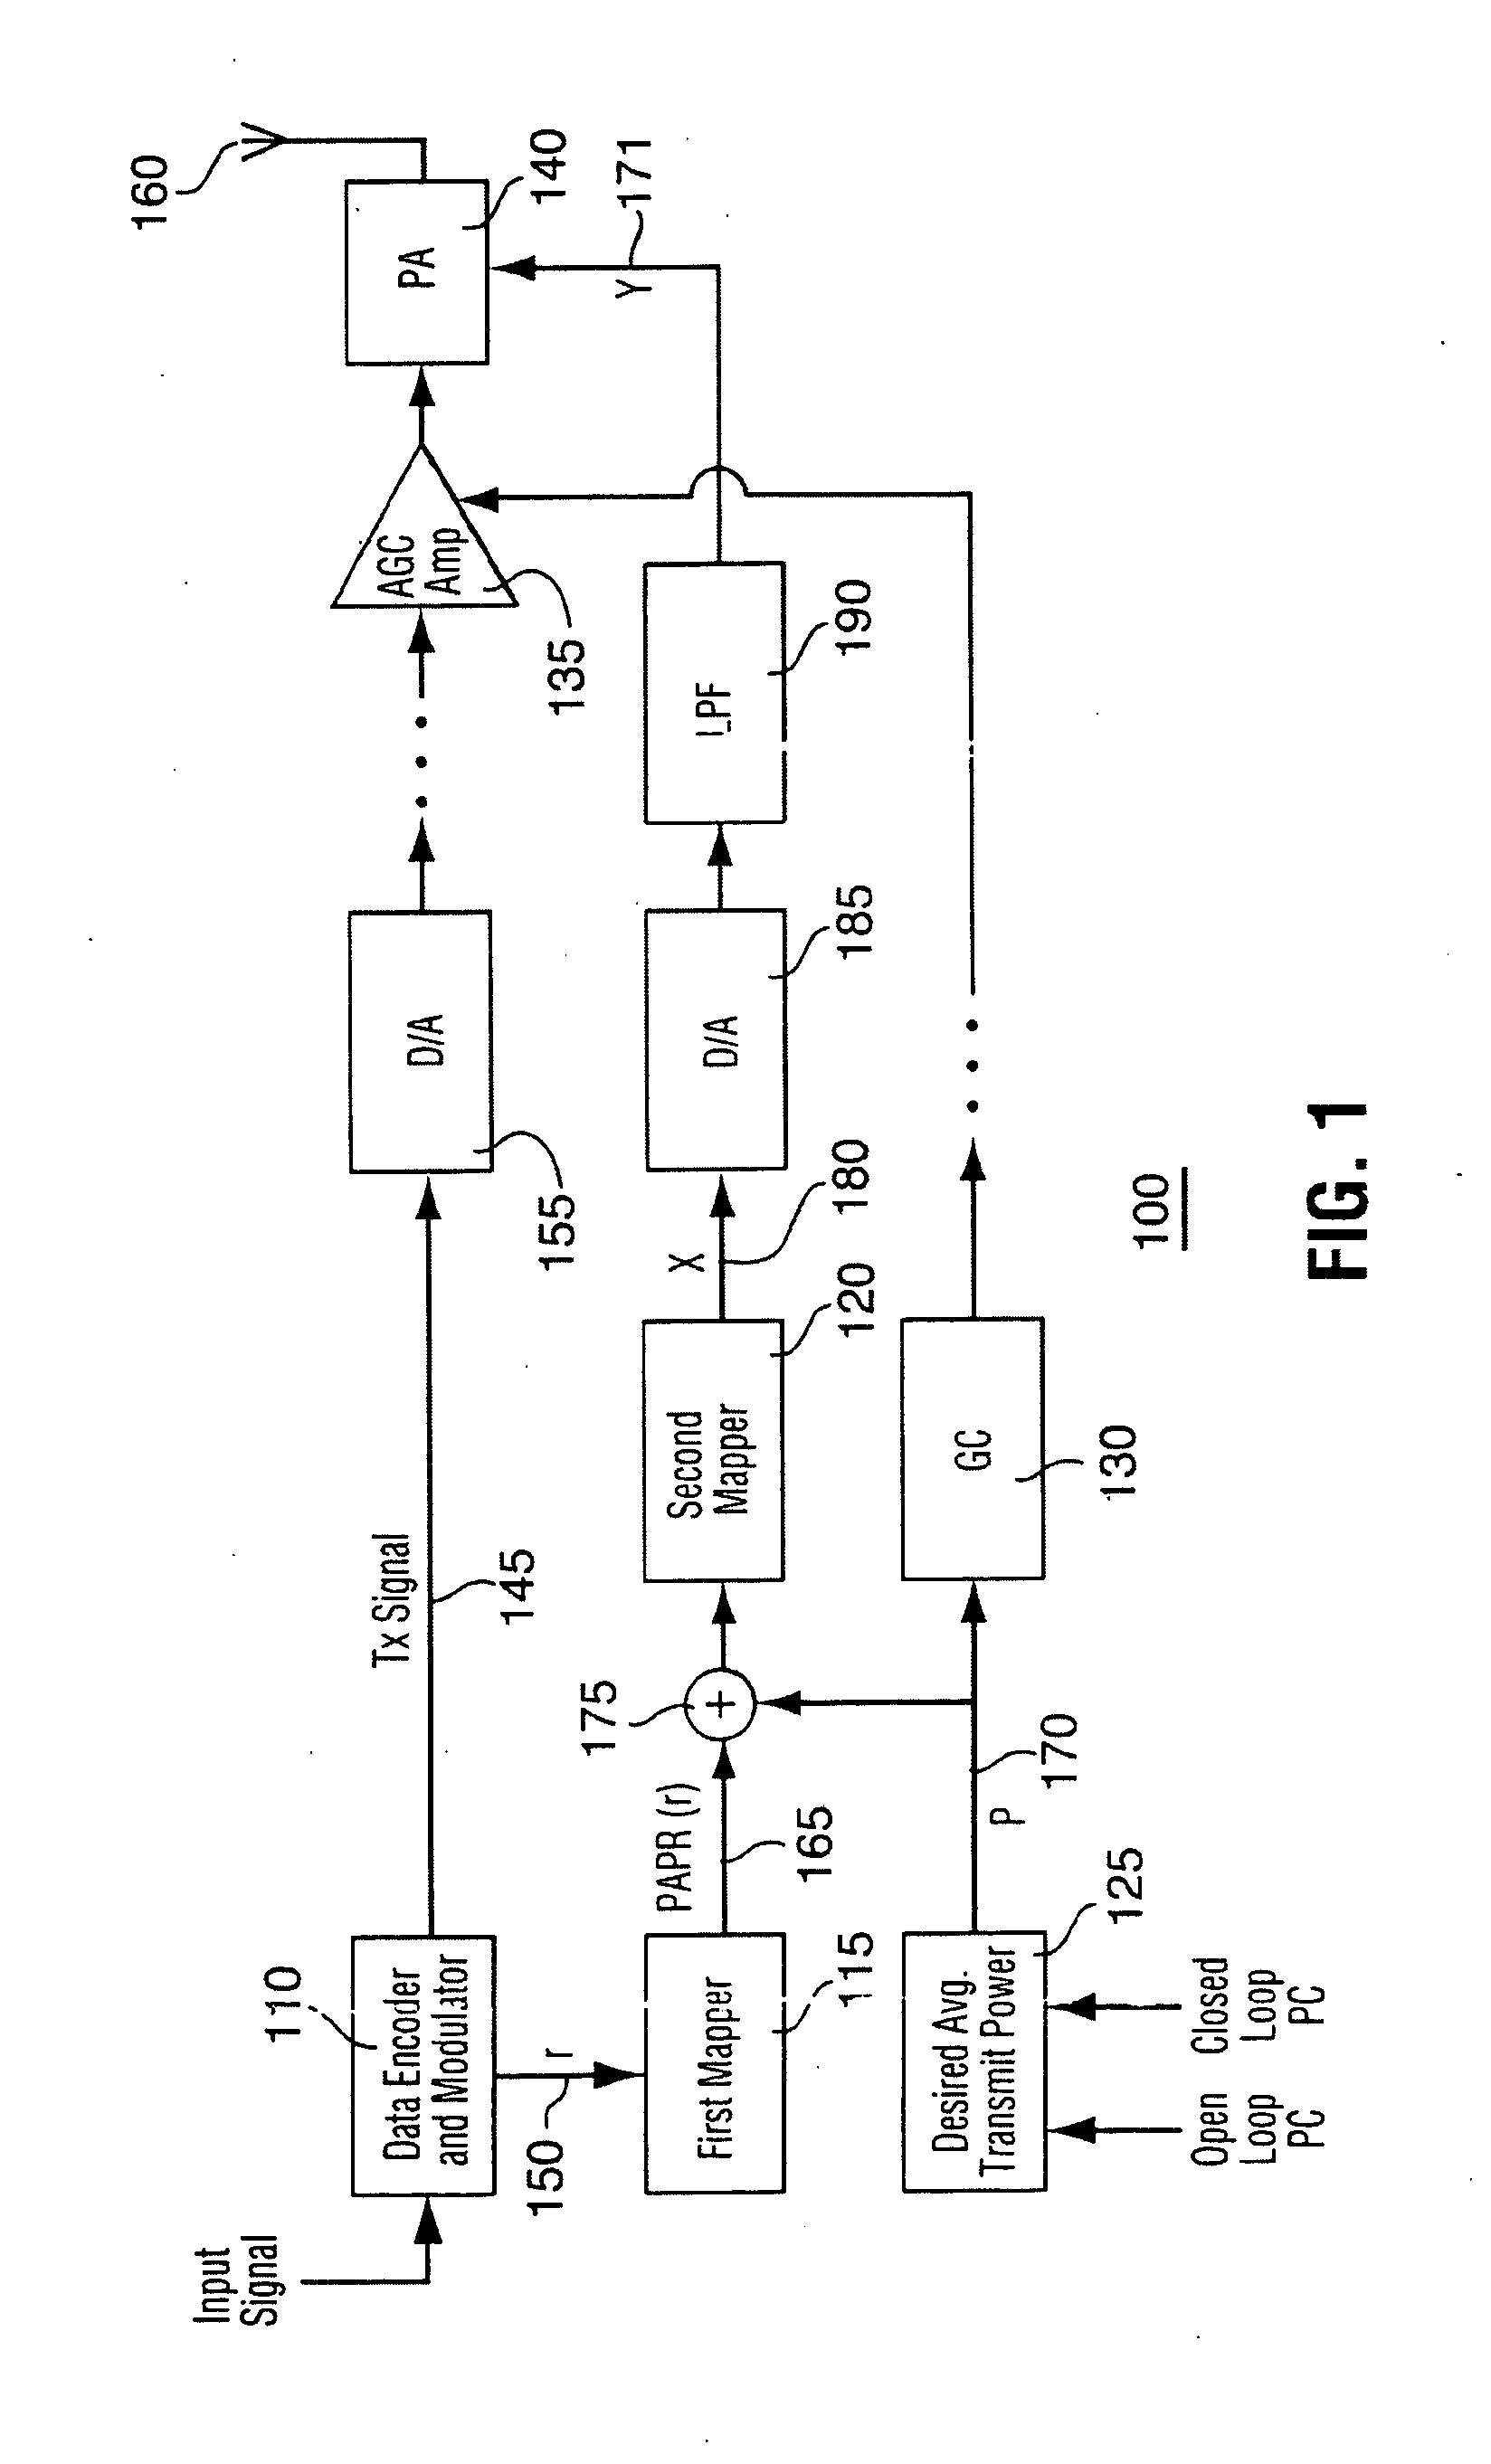 Method and apparatus for optimizing transmitter power efficiency